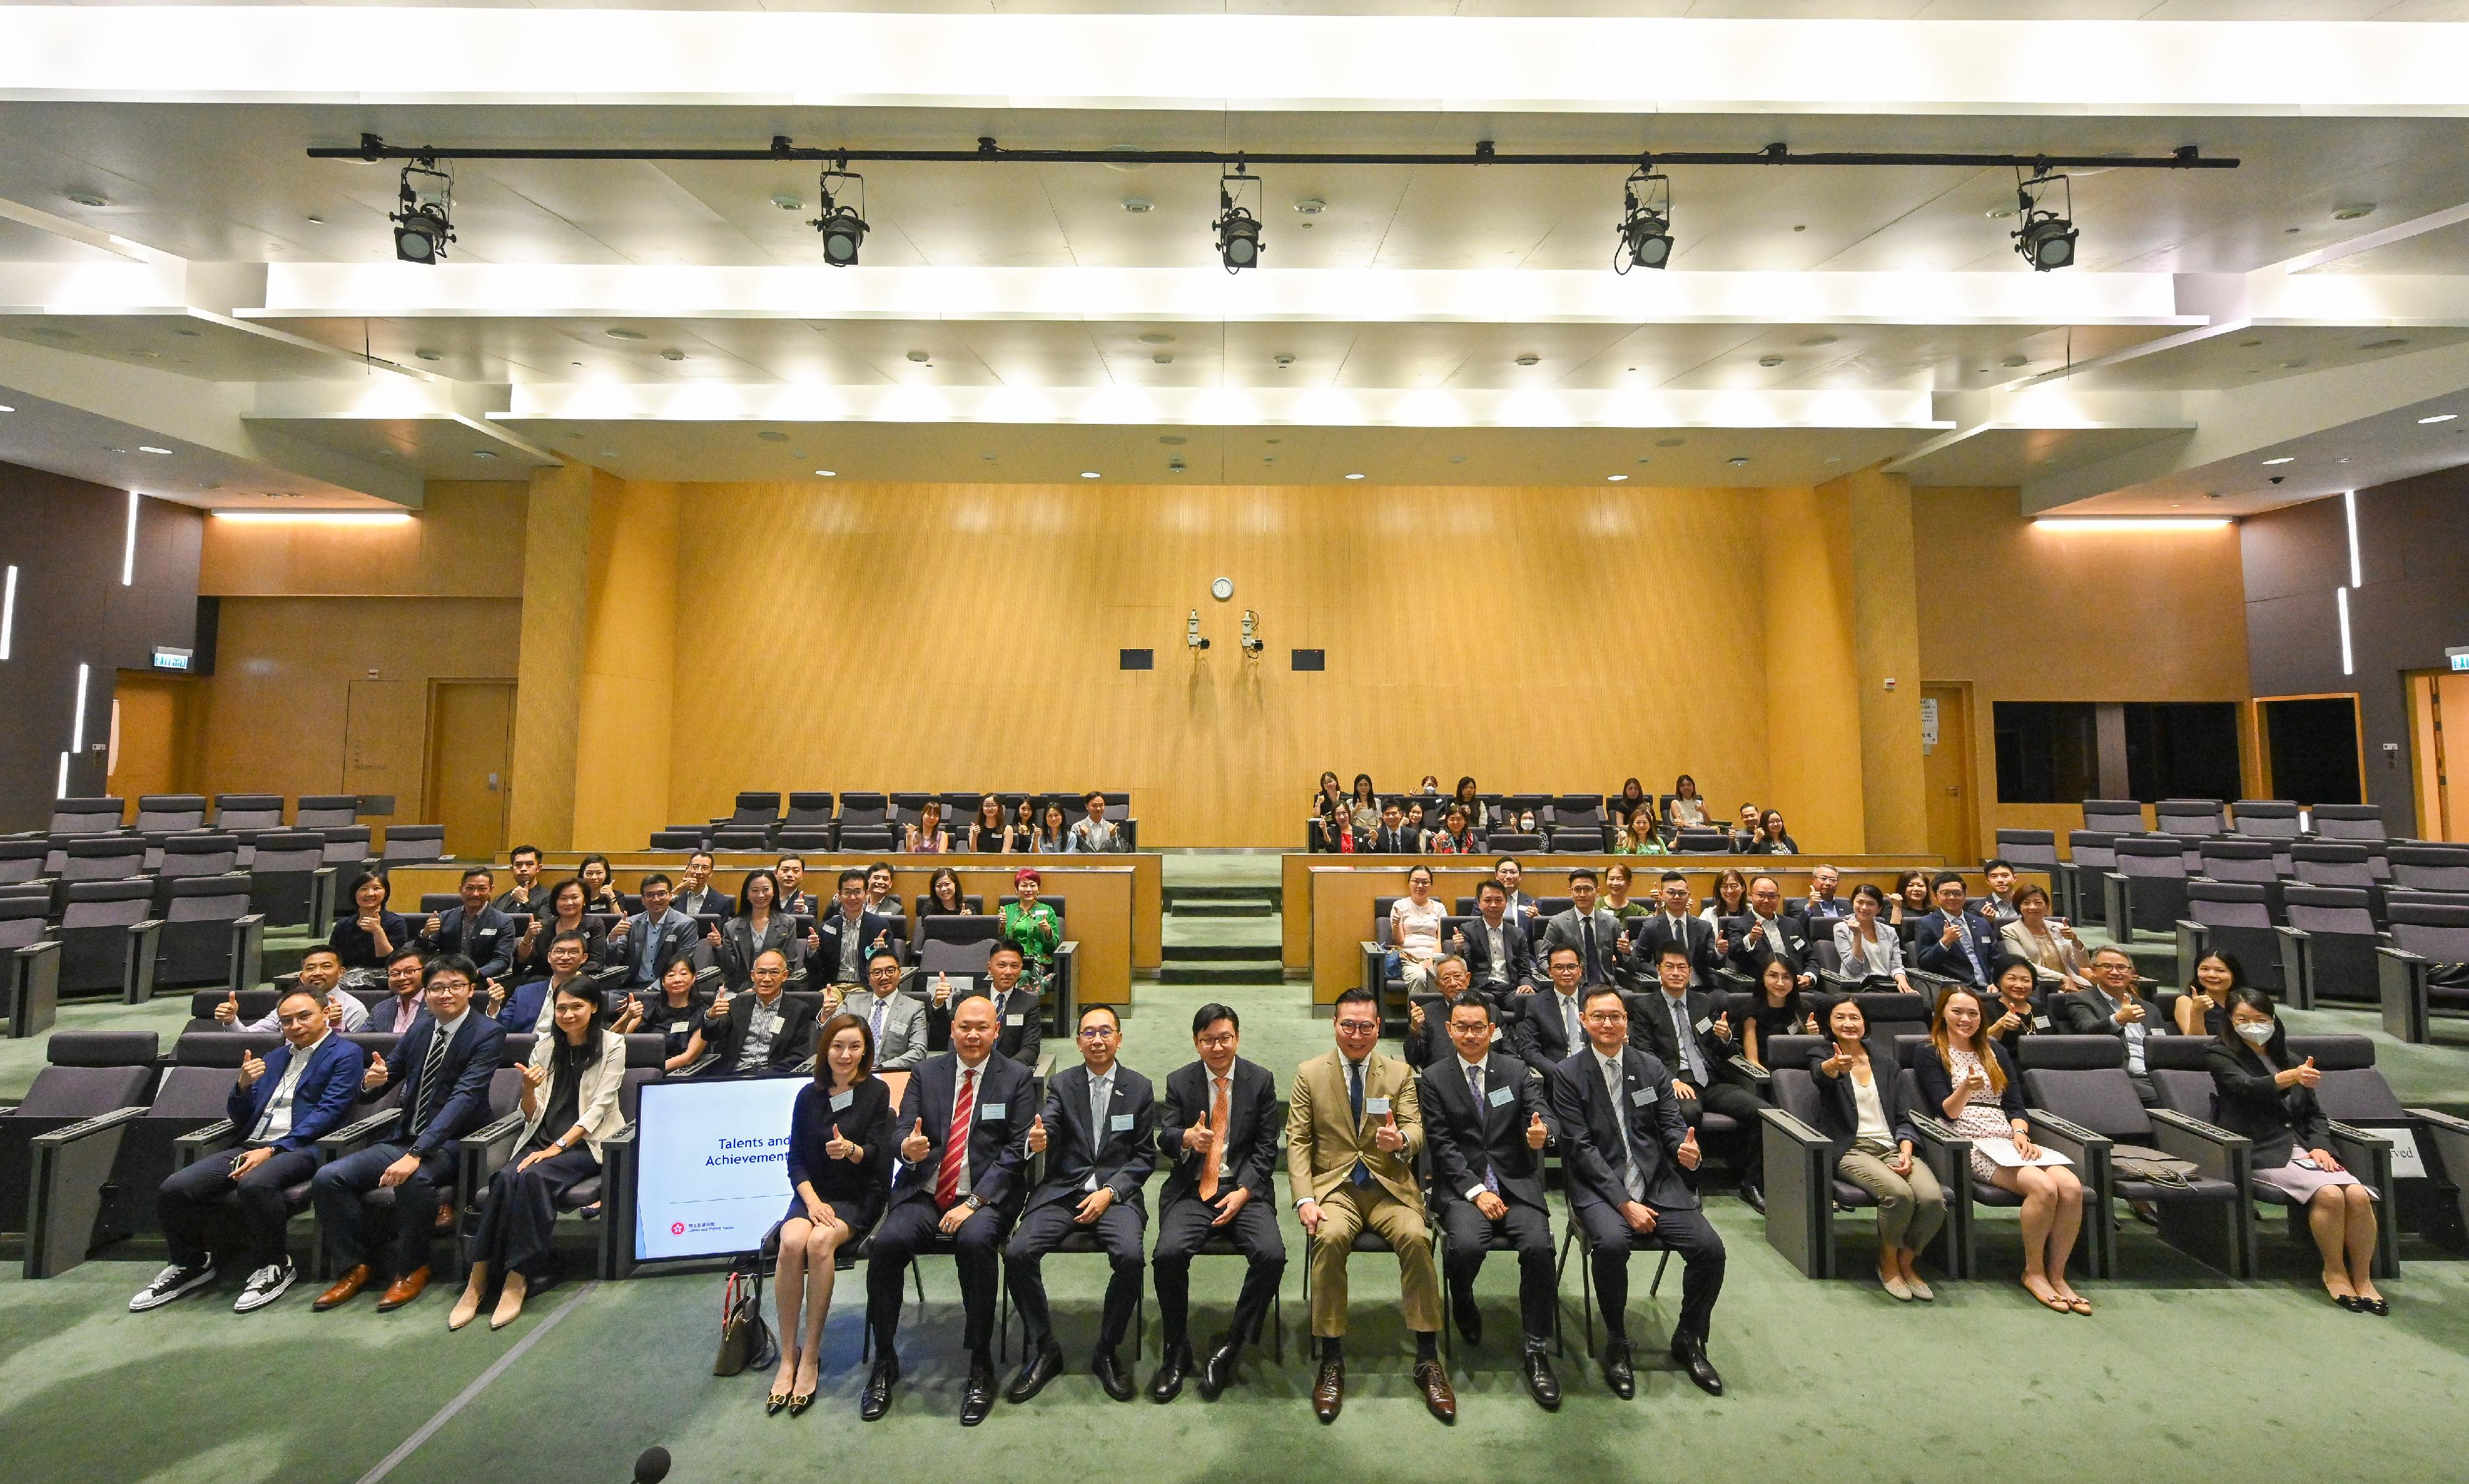 The Secretary for Labour and Welfare, Mr Chris Sun, today (July 14) hosted a seminar with local major chambers and the human resource management sector to review the implementation progress of relevant work in the first year of the current-term Government, and exchange views regarding such work in future. Photo shows (front row, from left) the Vice Honorary Secretary of the Hong Kong Chinese Importers' and Exporters' Association, Ms Sophia Lee; the Standing Committee Member of the Chinese General Chamber of Commerce, Hong Kong, Mr Johnny Chan; the Chief Executive Officer of the Hong Kong General Chamber of Commerce, Mr George Leung; Mr Sun; the President of the Chinese Manufacturers' Association of Hong Kong, Dr Allen Shi; the Executive Deputy Chairman of the Federation of Hong Kong Industries, Mr Steve Chuang; and the President of the Hong Kong Institute of Human Resource Management, Mr Lawrence Hung, with participants.